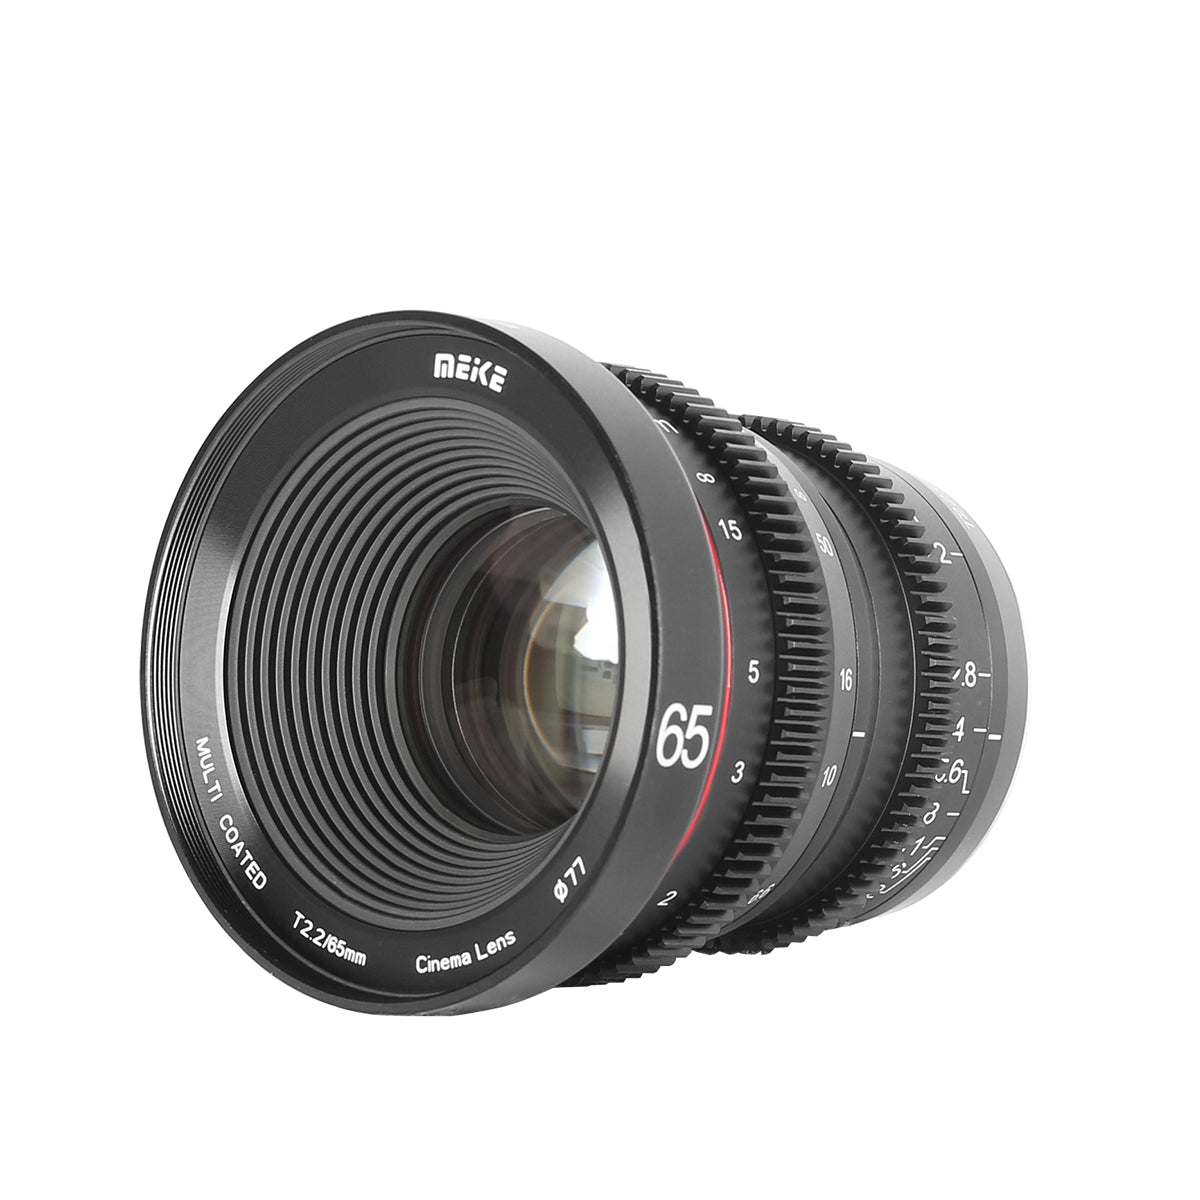 Meike Cinema Prime 65mm T2.2 Lens (Sony E Mount) in a Front-Side View